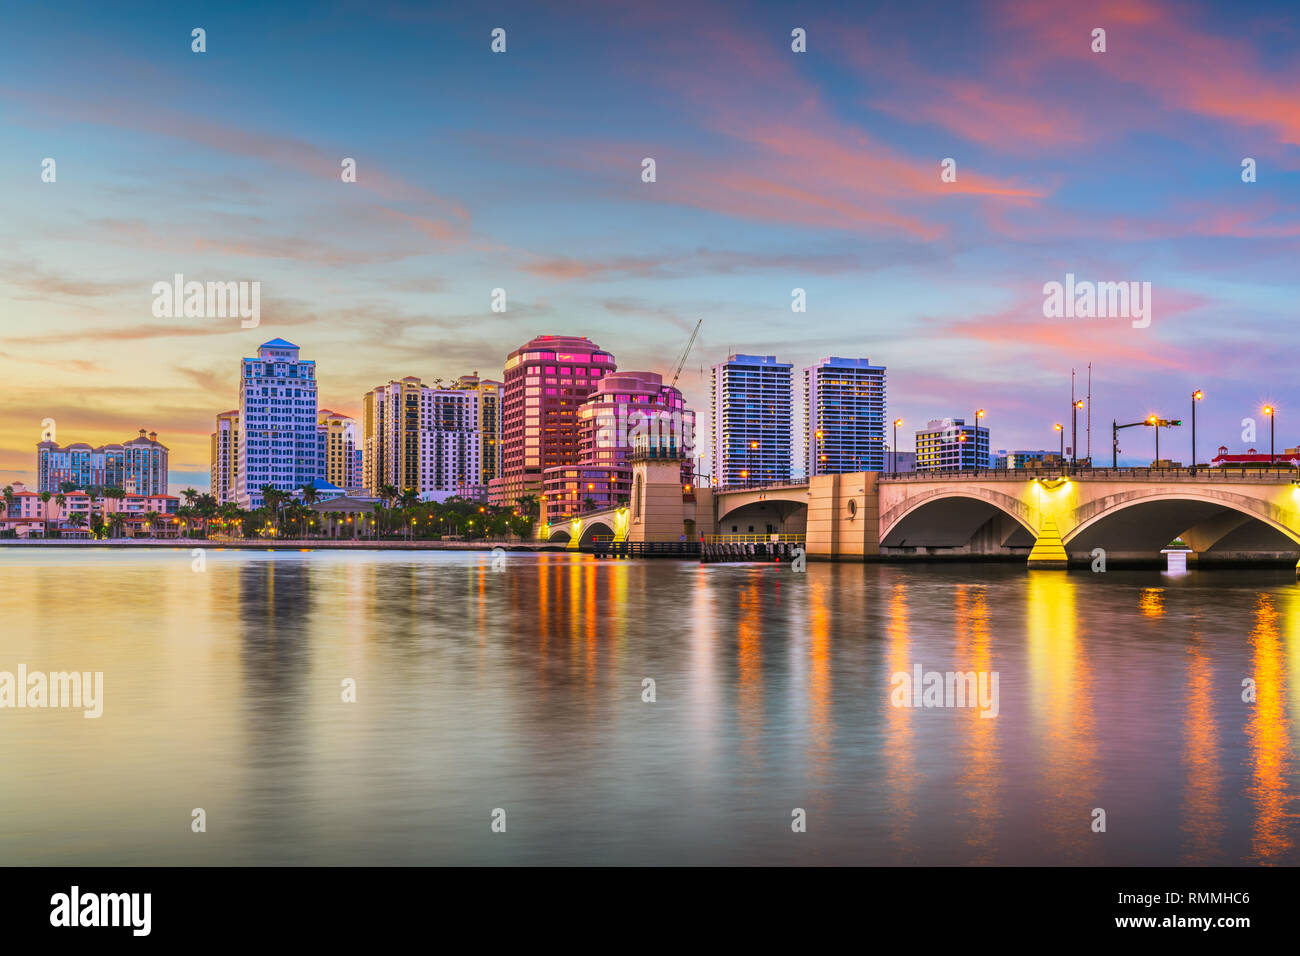 West Palm Beach, Florida, USA downtown skyline on the Intracoastal Waterway at dusk. Stock Photo